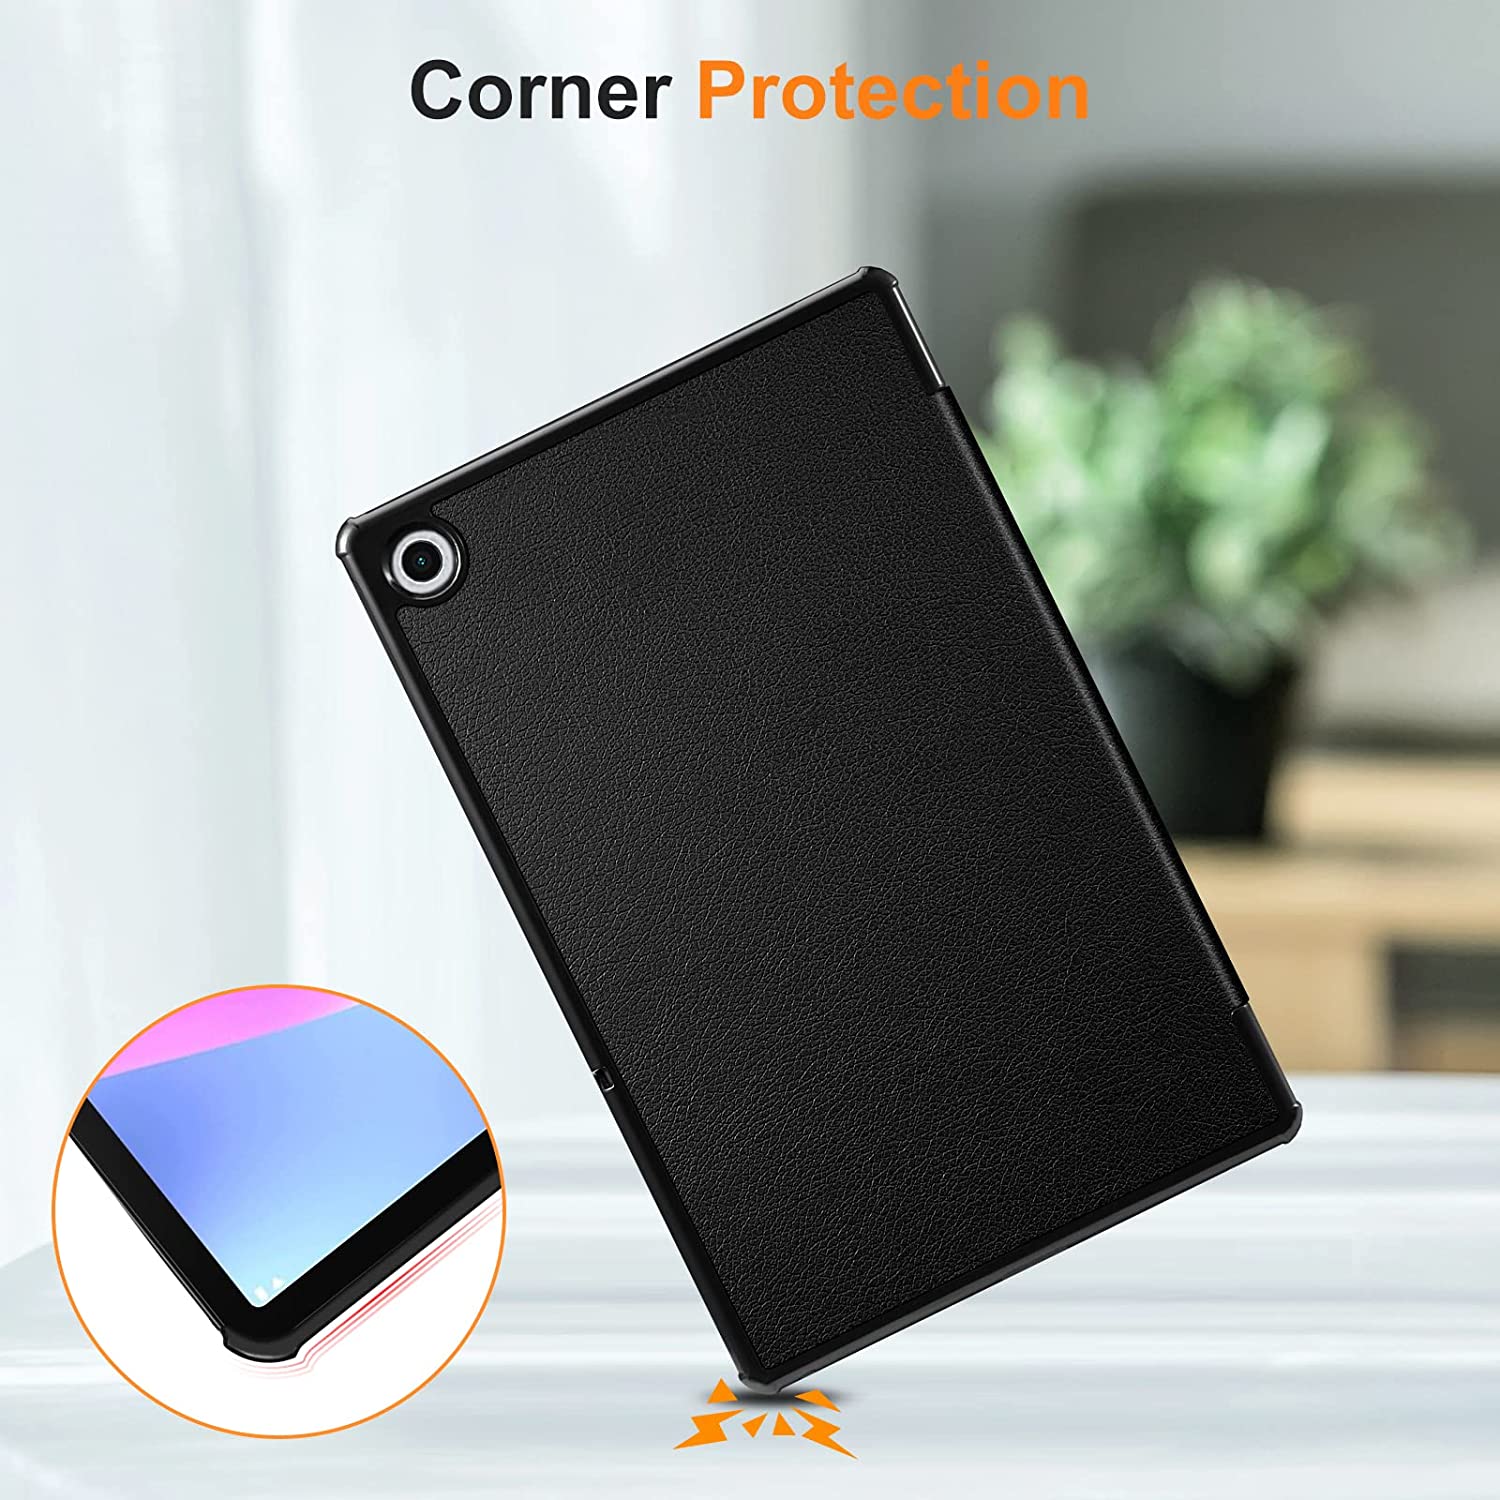 Case LENOVO TAB M10 PLUS 10.6 3RD GEN Tech-Protect SC Pen black  cases and  covers \ Types of cases \ Flip Case cases and covers \ Material types \  Hybrid all